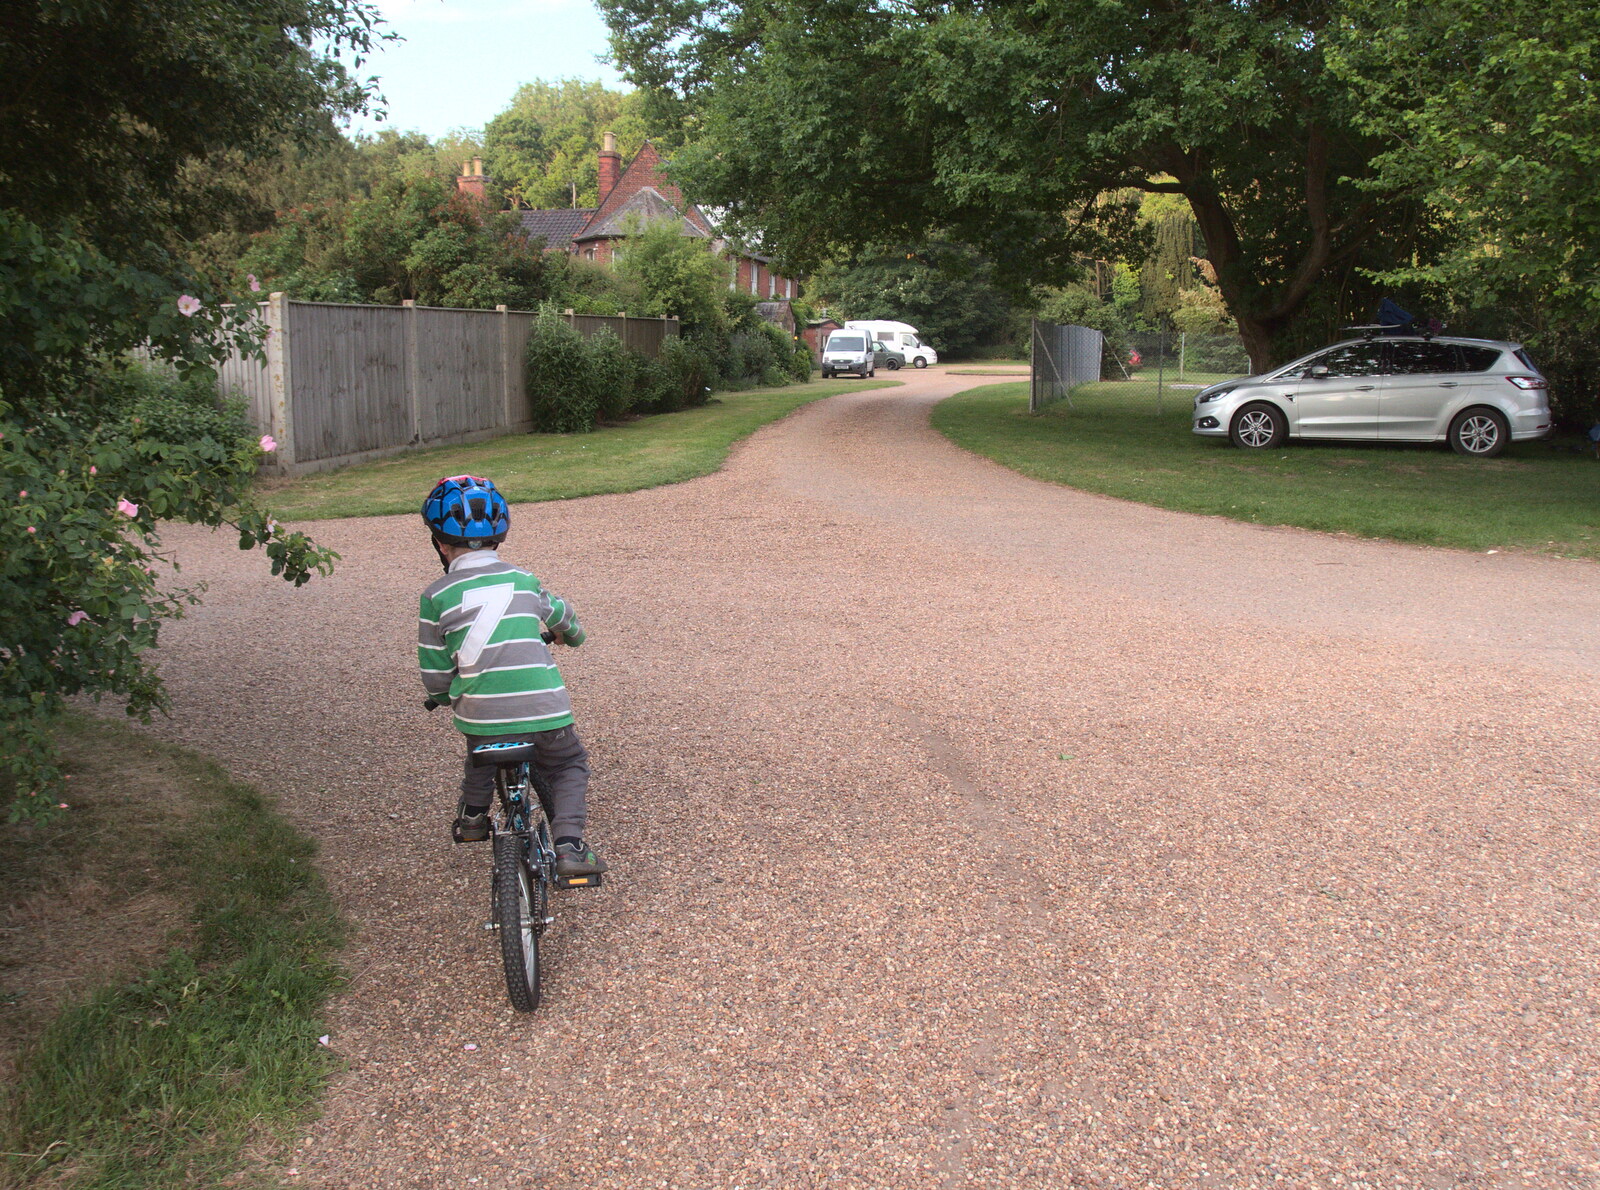 Harry rides around the campsite from Dower House Camping, West Harling, Norfolk - 27th May 2018